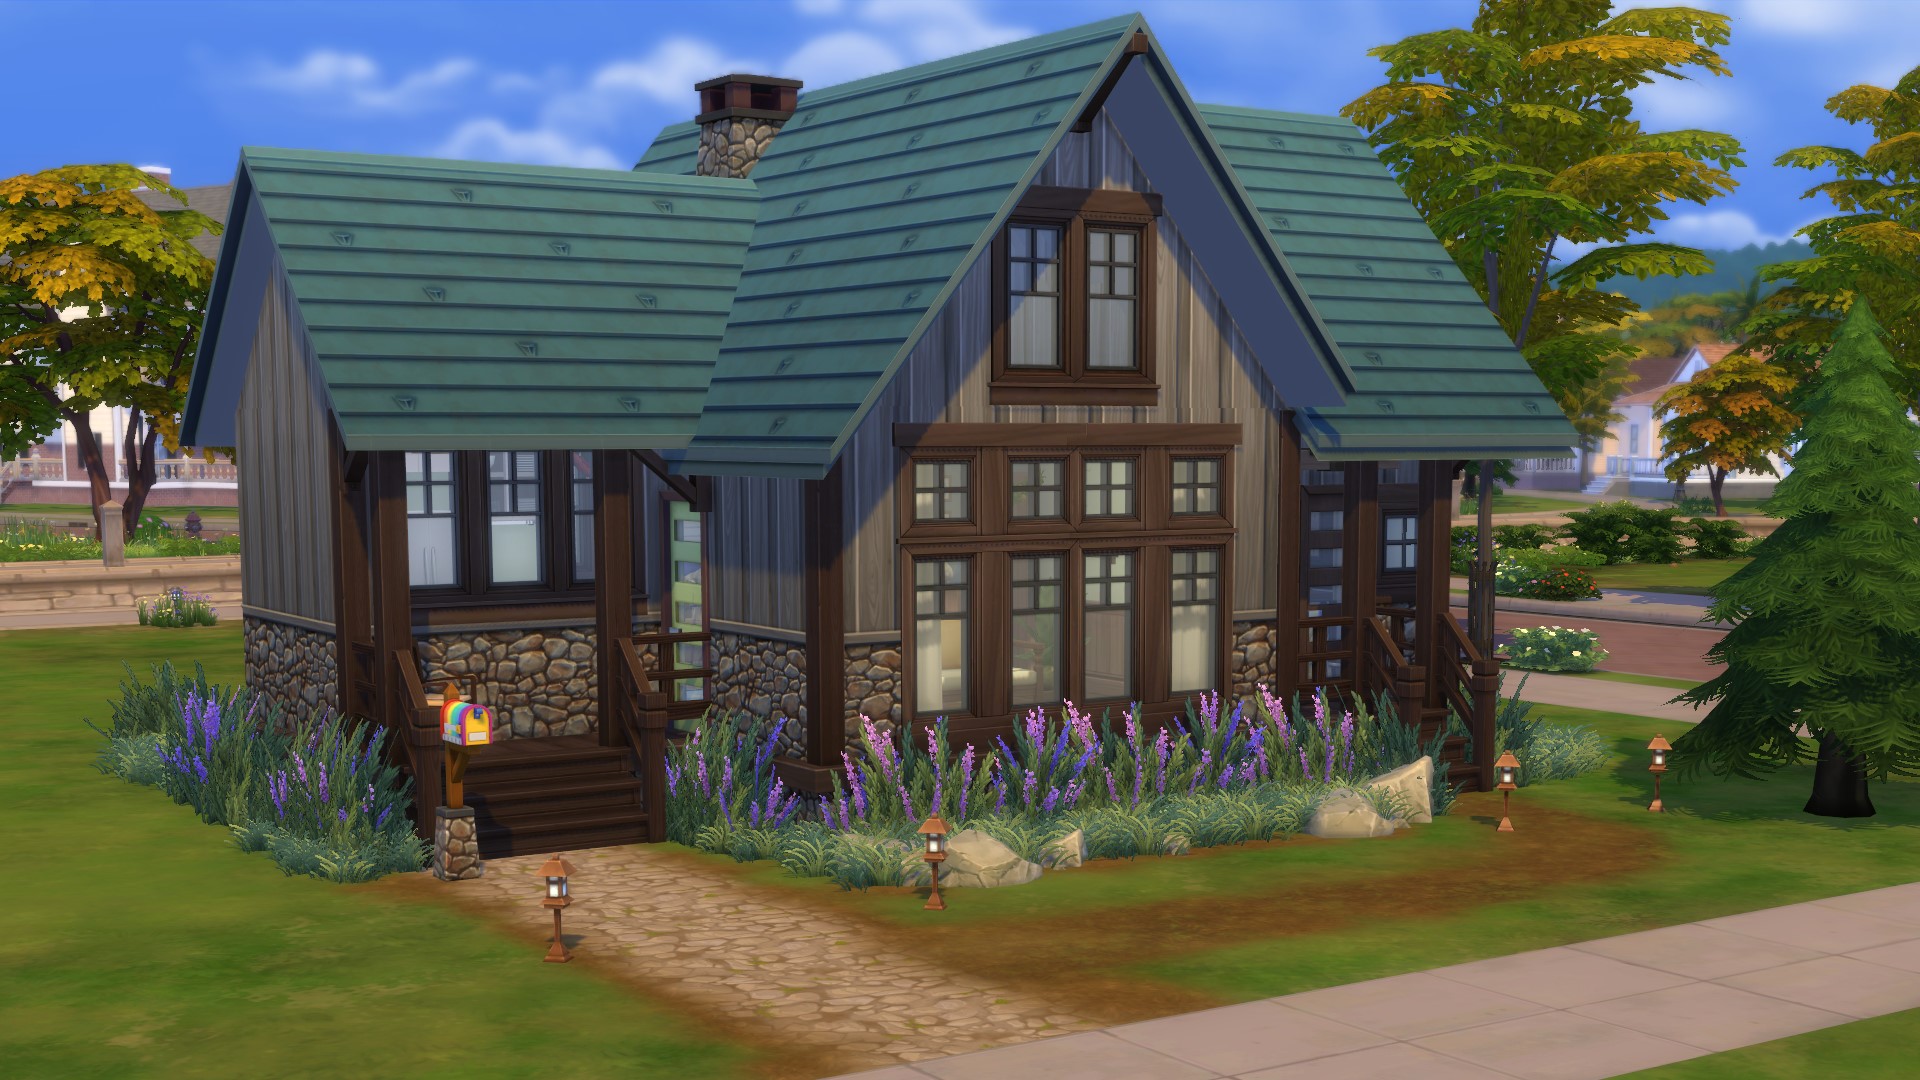  Sims 4 build tips: 7 tricks for less boring builds 